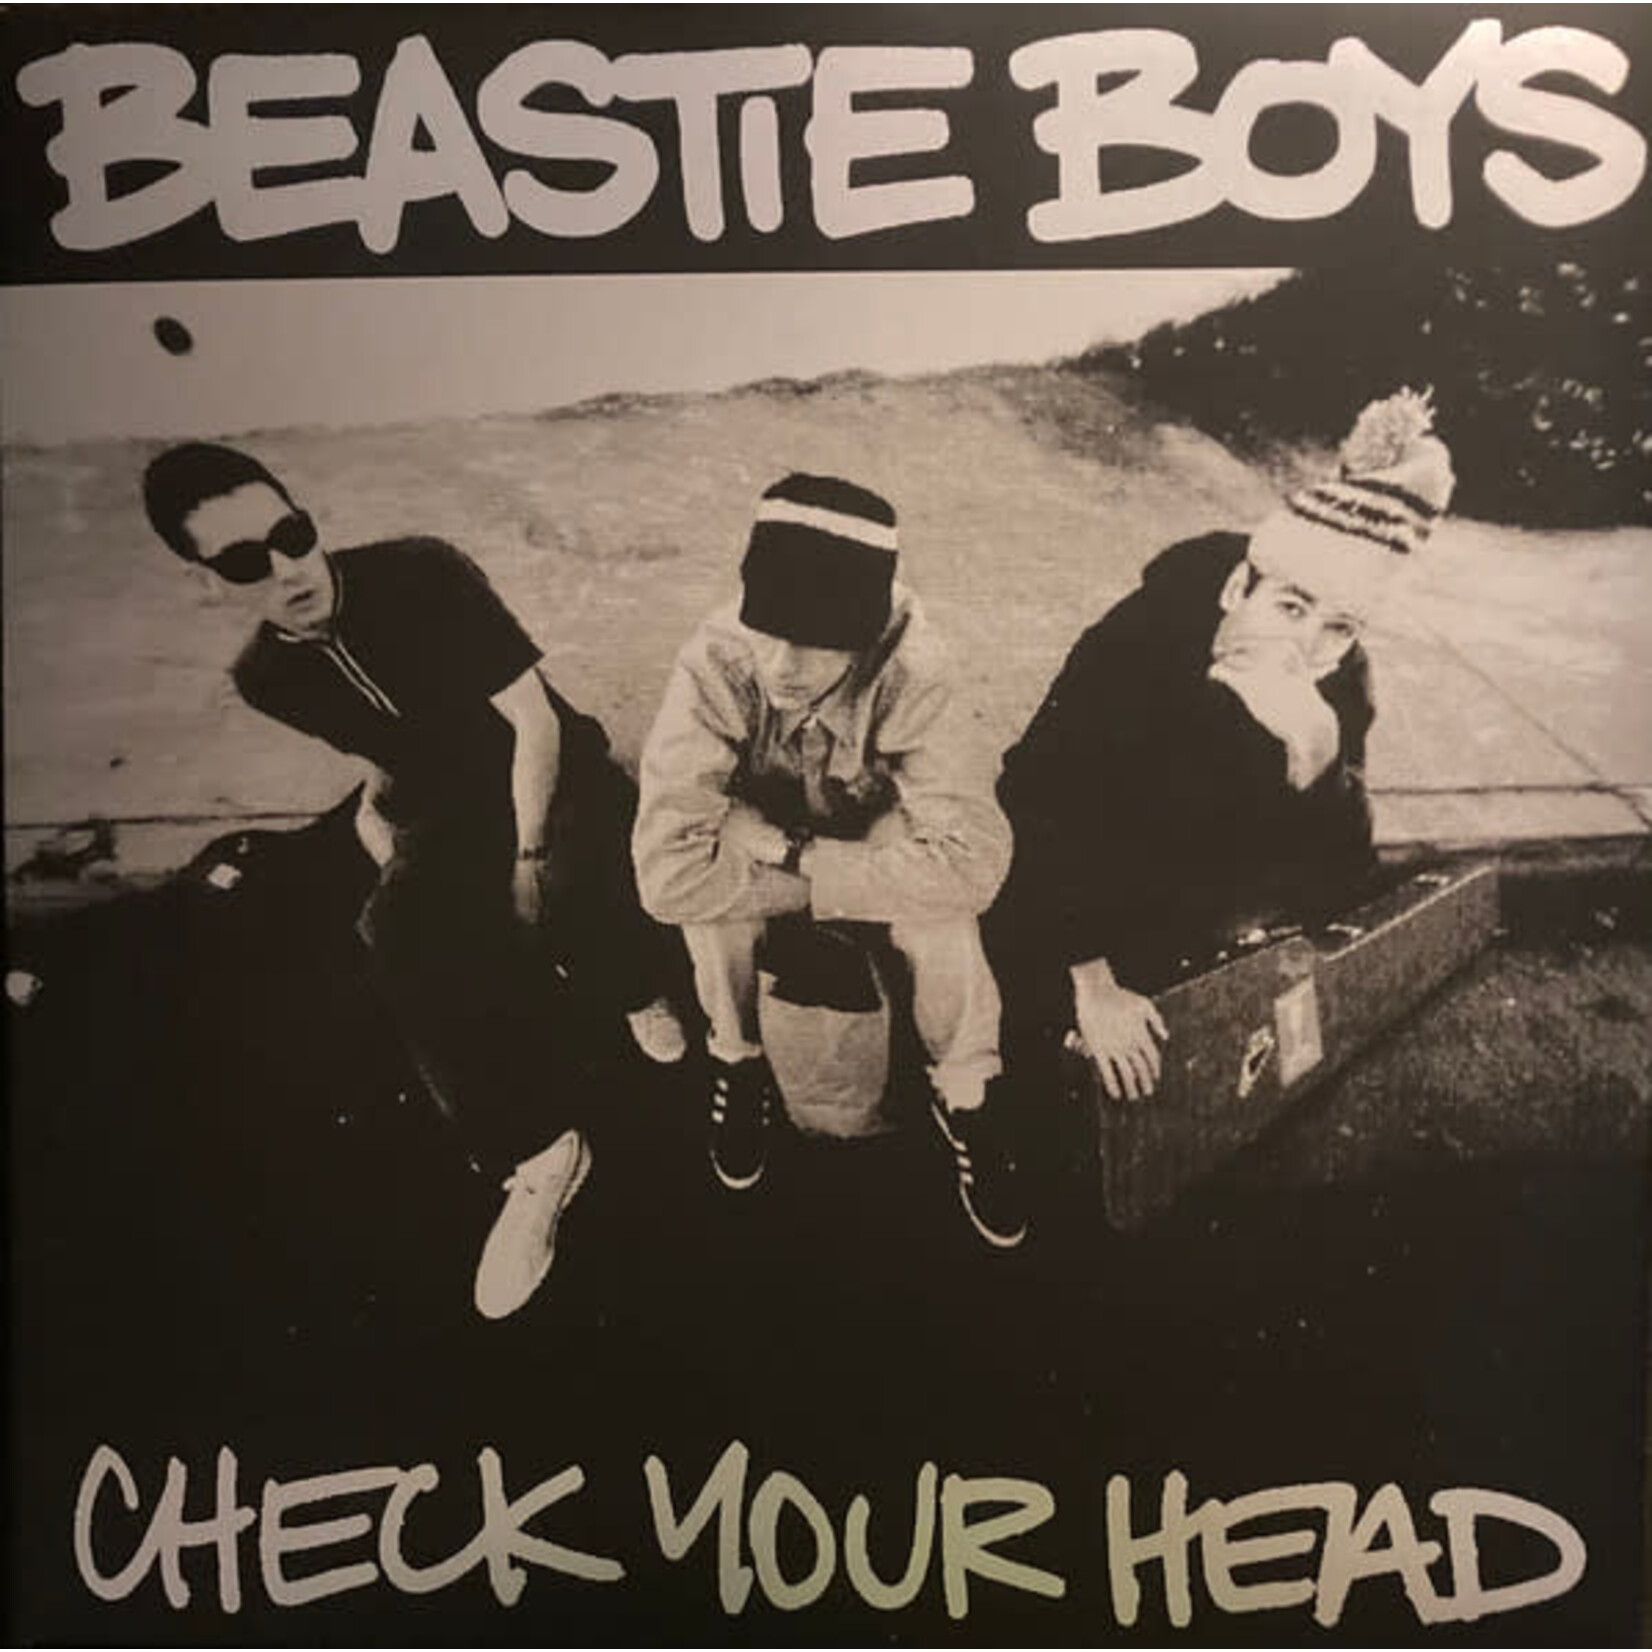 [New] Beastie Boys: Check Your Head - 30th Anniversary (4LP, limited edition box, indie exclusive) [UME]